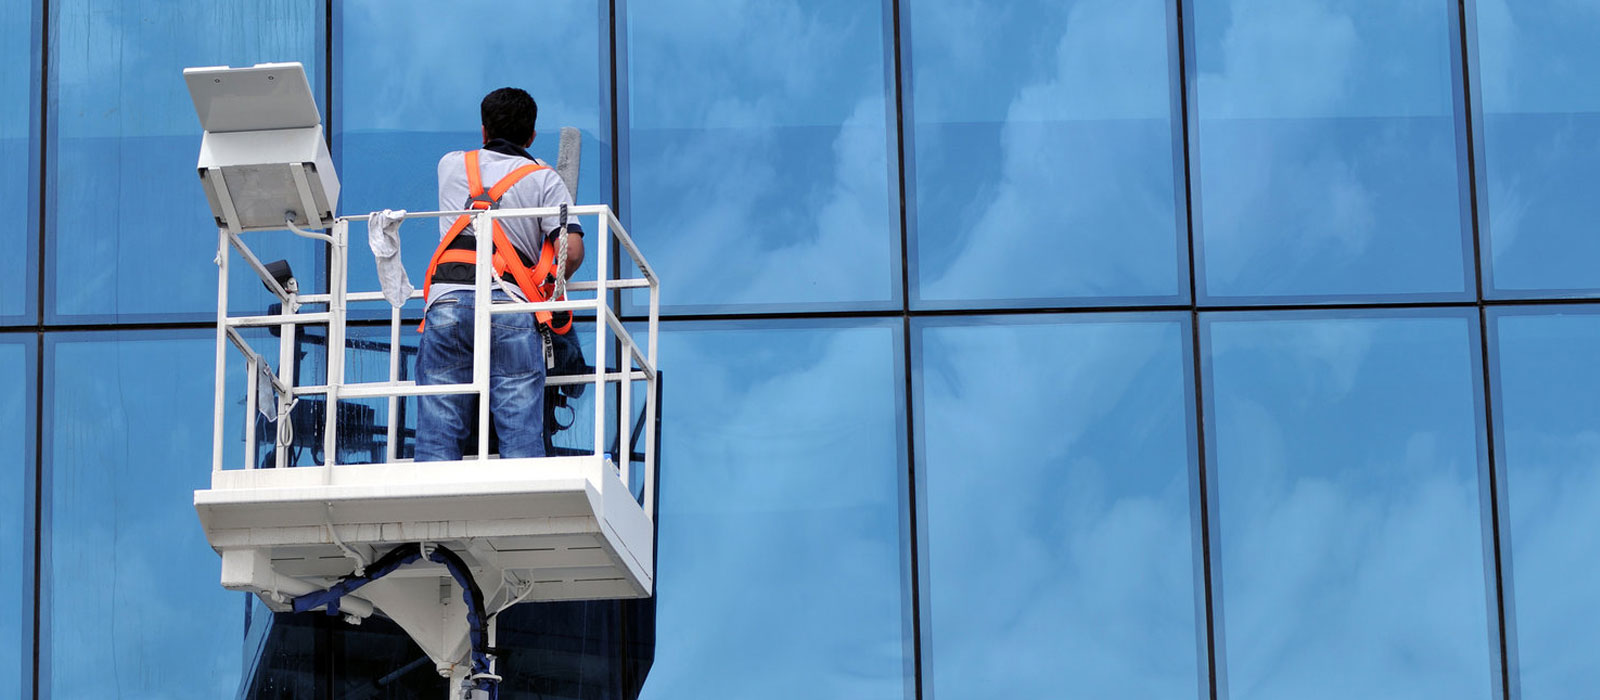 a person on a lift with a window washer